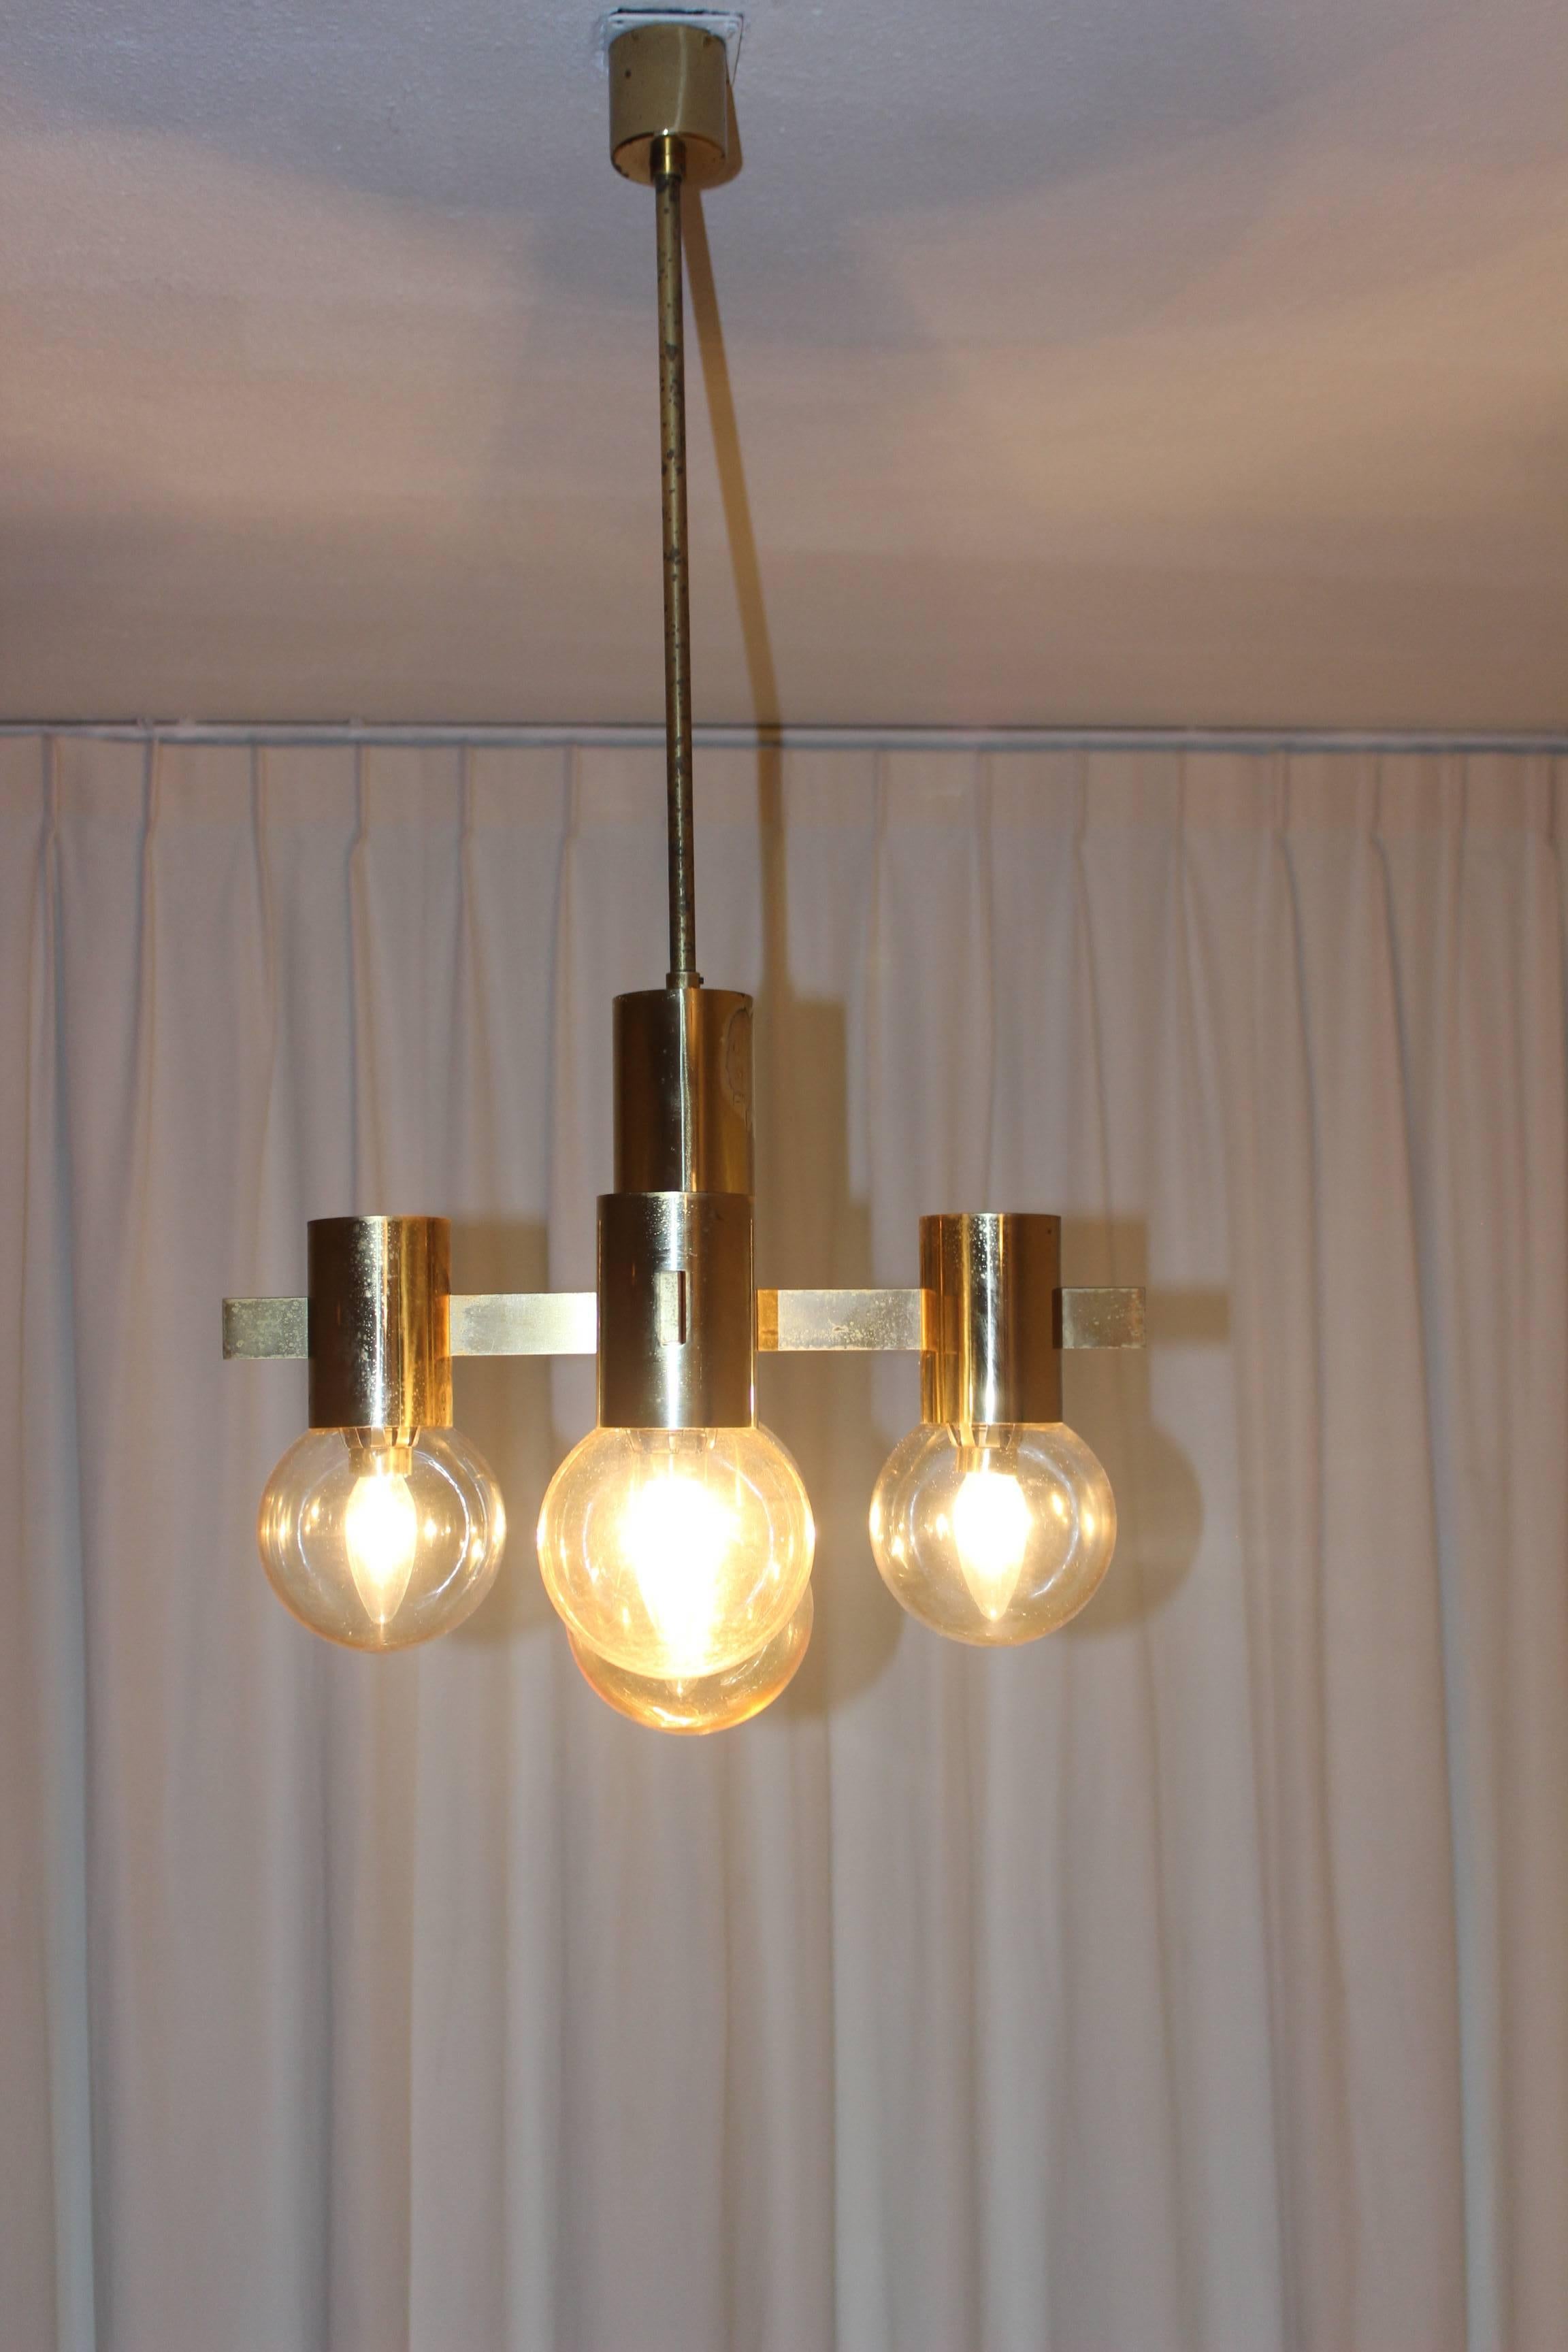 Gaetano Sciolari chandelier.

Rare beautiful brass chandelier with five smoked glass globes from the seventies, three chandeliers available in this line. If you are looking for a truly vintage look than these chandeliers are the way to go. Look at